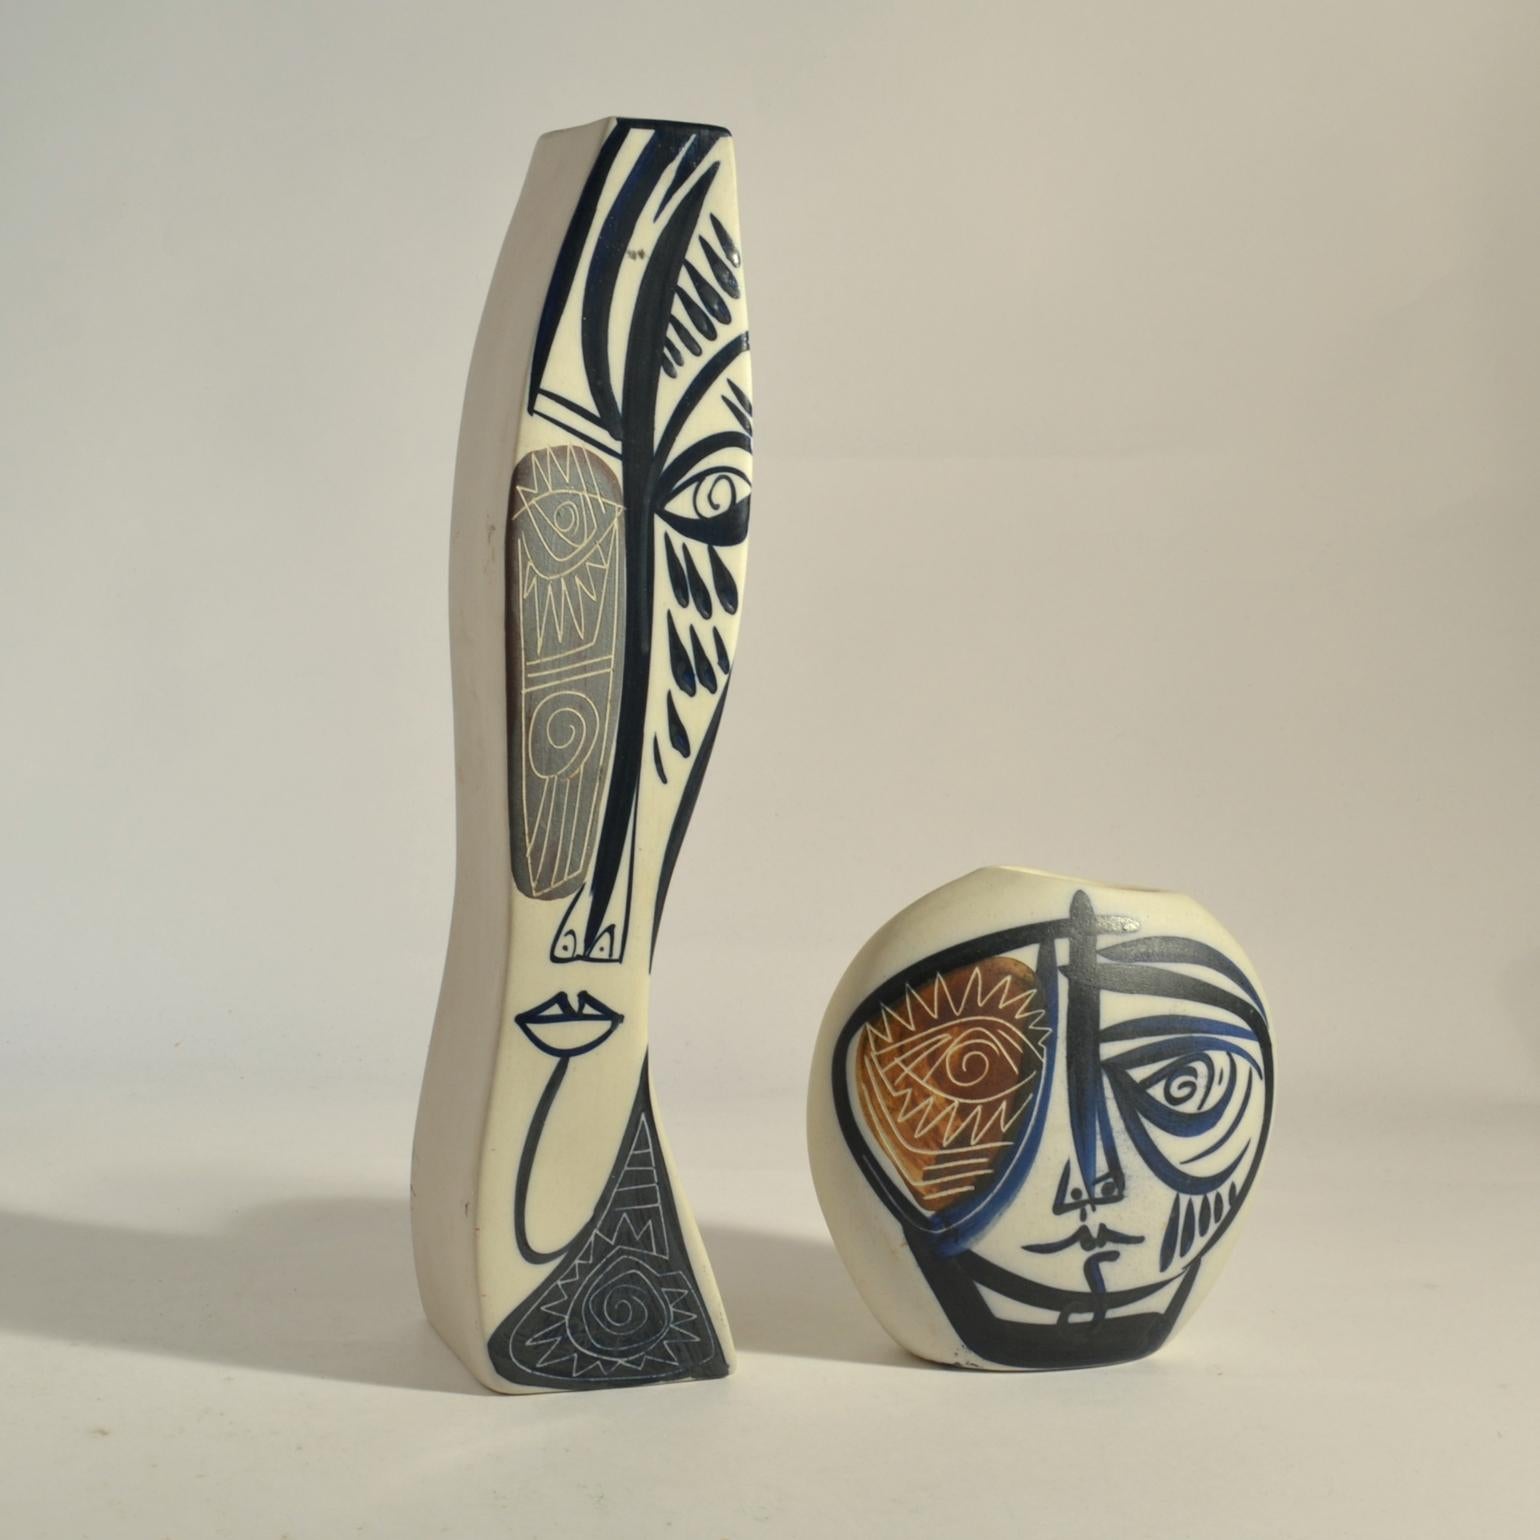 Two freeform white porcelain vases each have expressive brutalist face painted in ink blue, grey and brown strikes and part scratched into the glaze. They are both signed.
Dimensions:
Small vase; 16 x 16 x 7 cm
Tall vase; 40 x 9 x 8 cm.
 